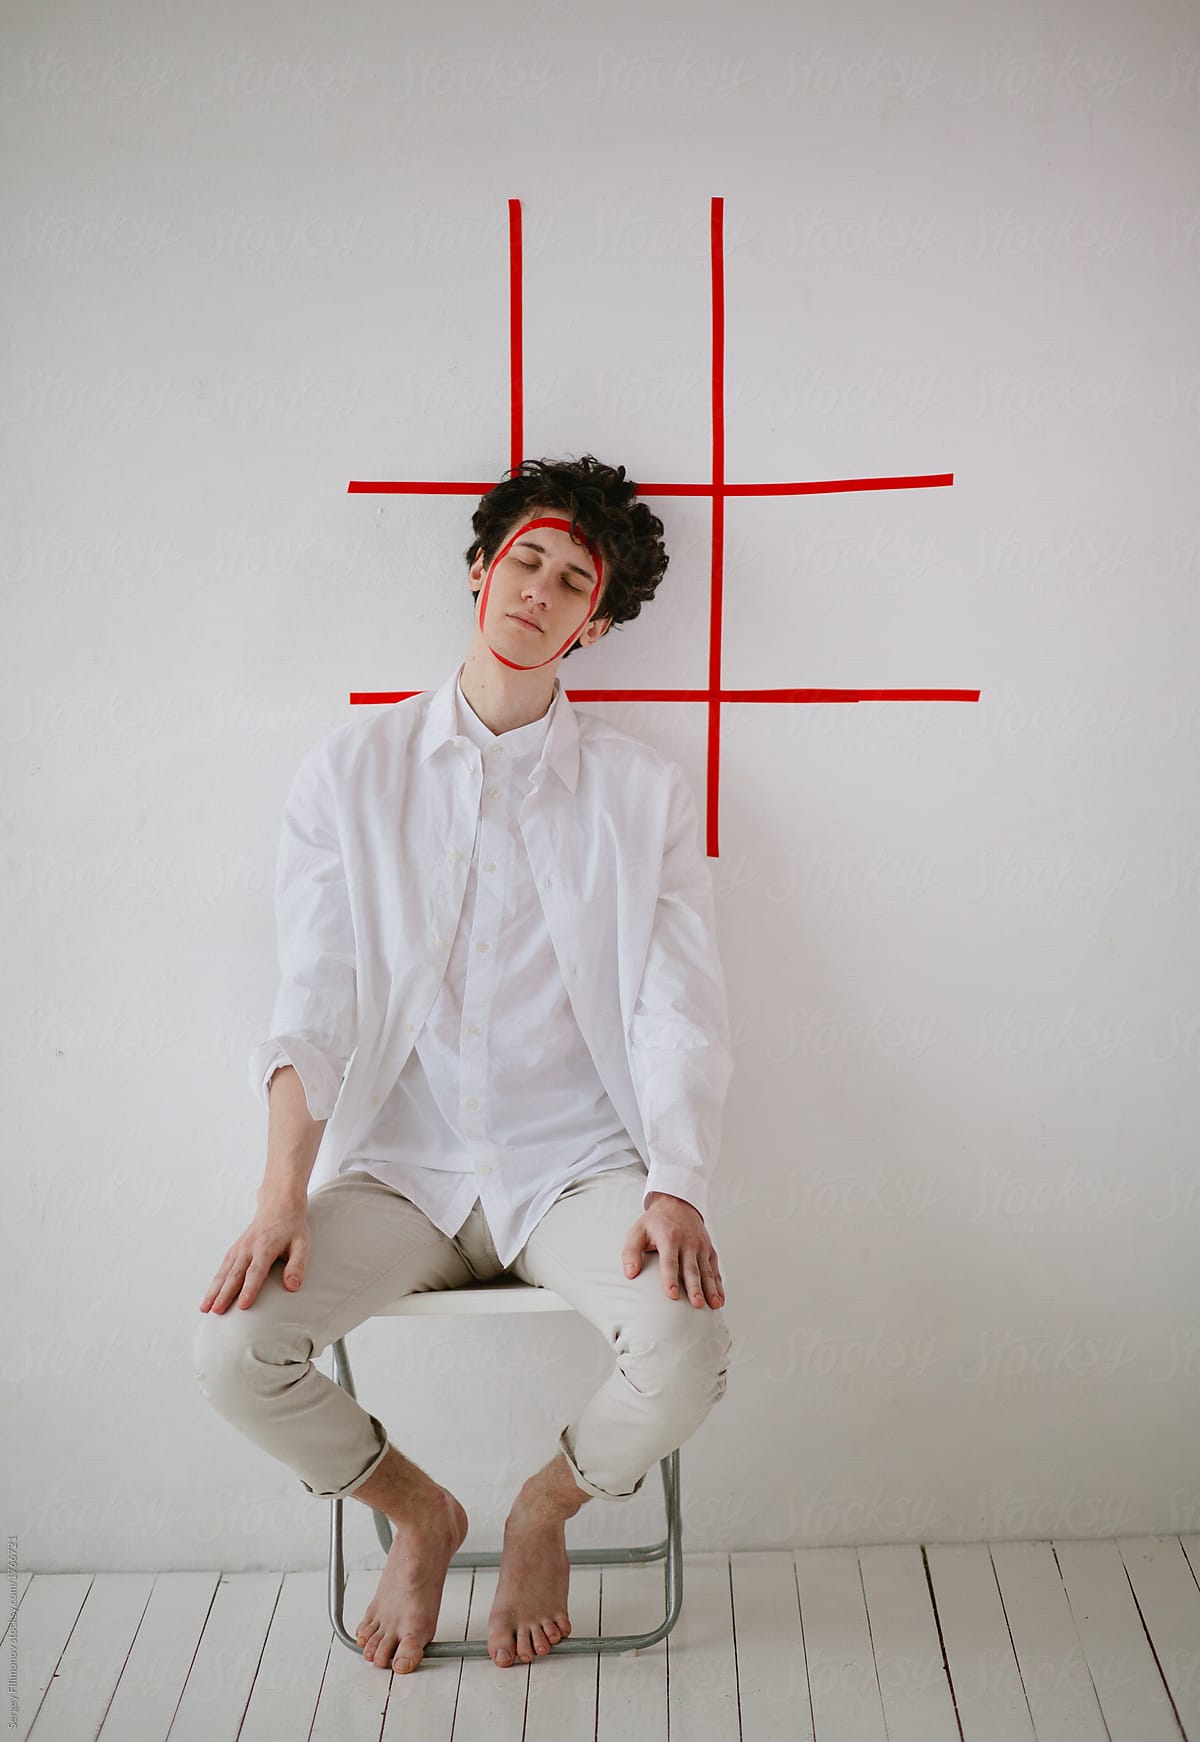 Young man posing with red sticky tape on his face